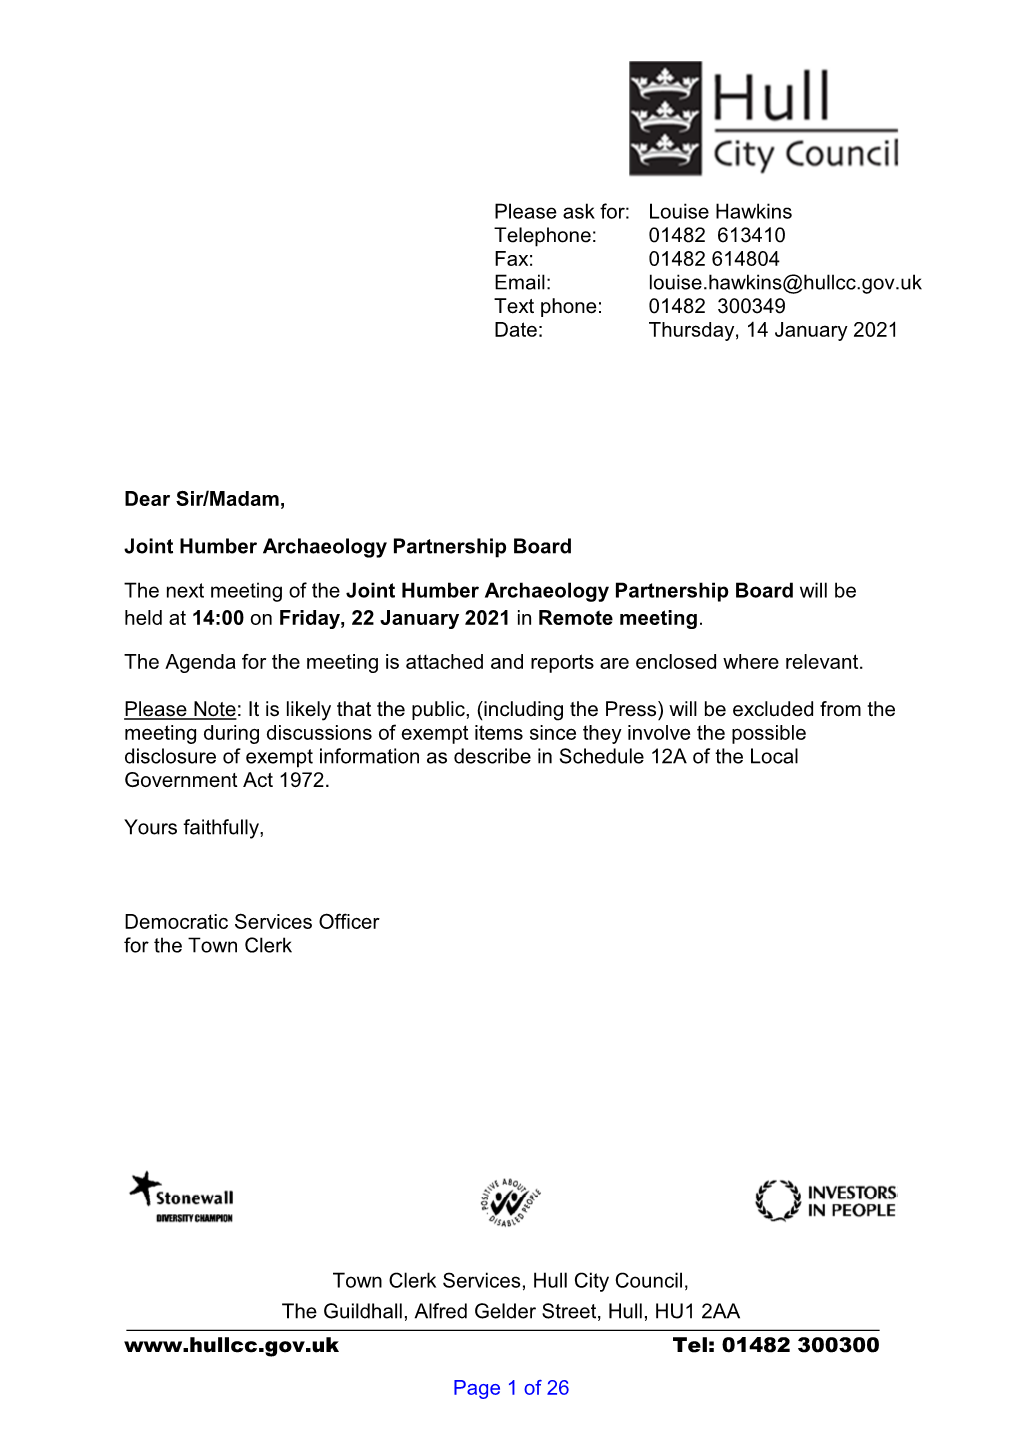 Joint Humber Archaeology Partnership Board